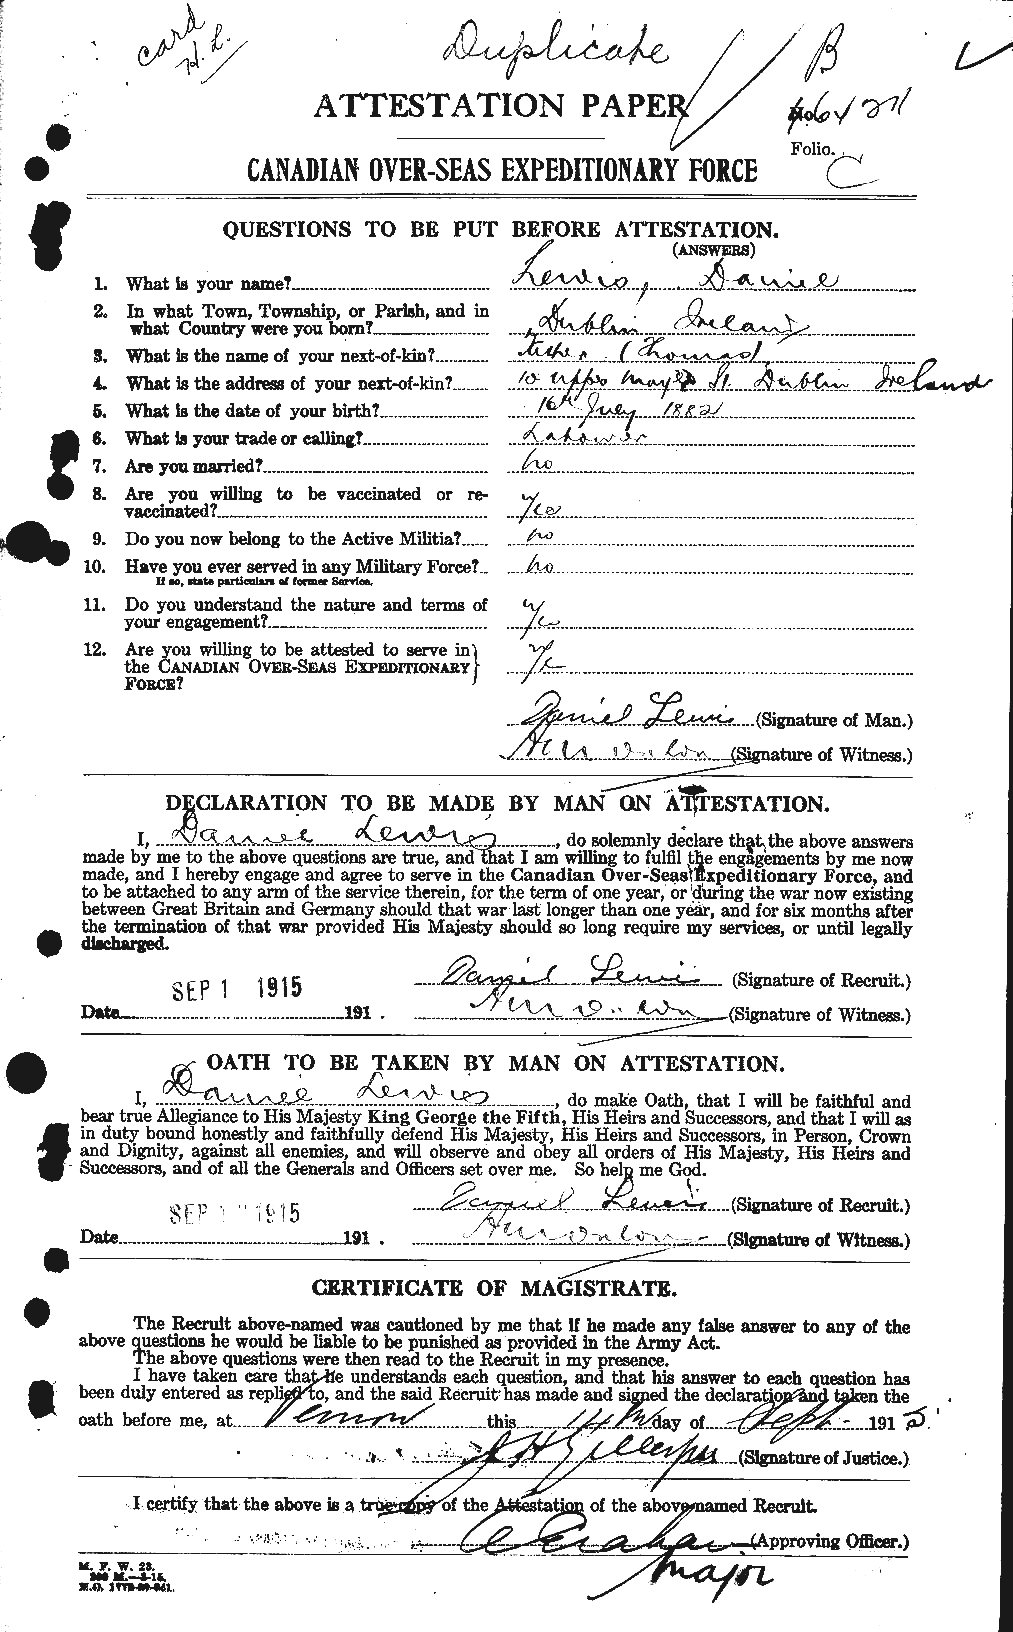 Personnel Records of the First World War - CEF 691617a